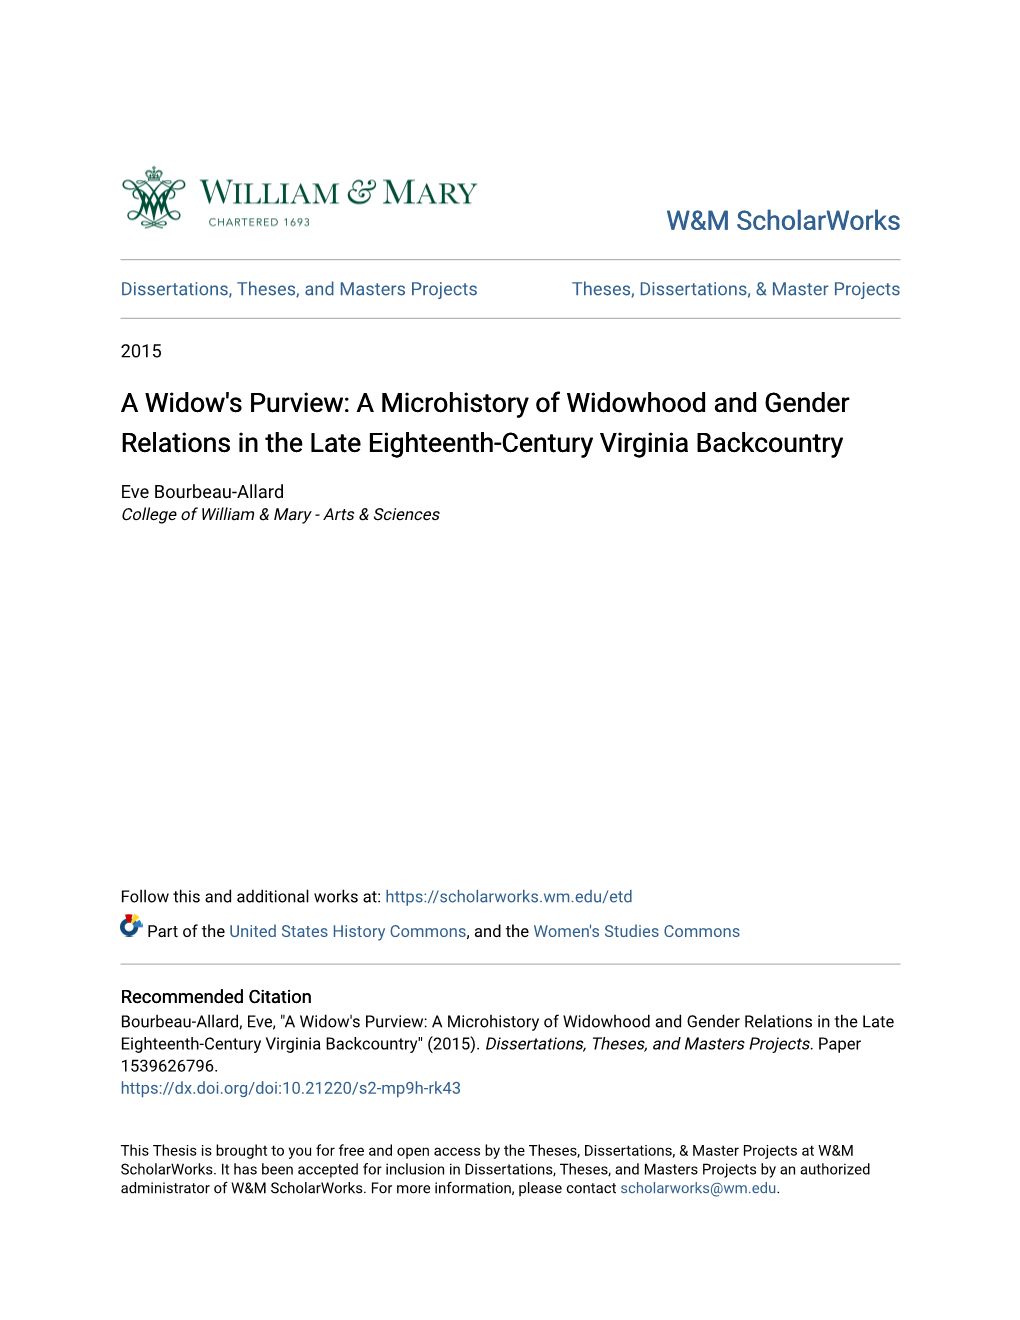 A Microhistory of Widowhood and Gender Relations in the Late Eighteenth-Century Virginia Backcountry